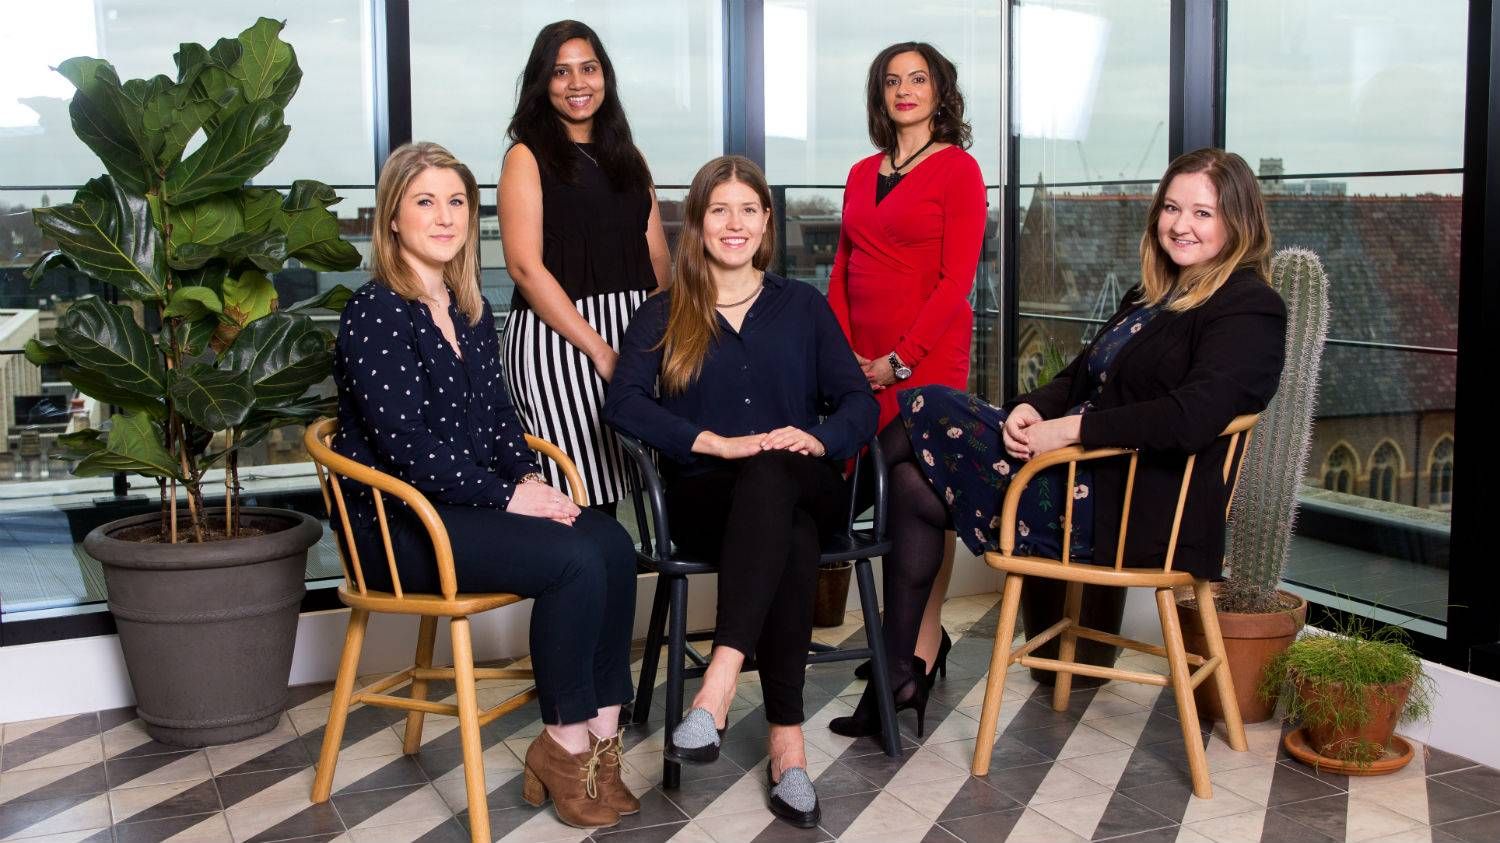 From left to right: Gemma Trebble, Snehal Malhotra, Magdalena Krön, Sonal Shah and Charlotte Haines